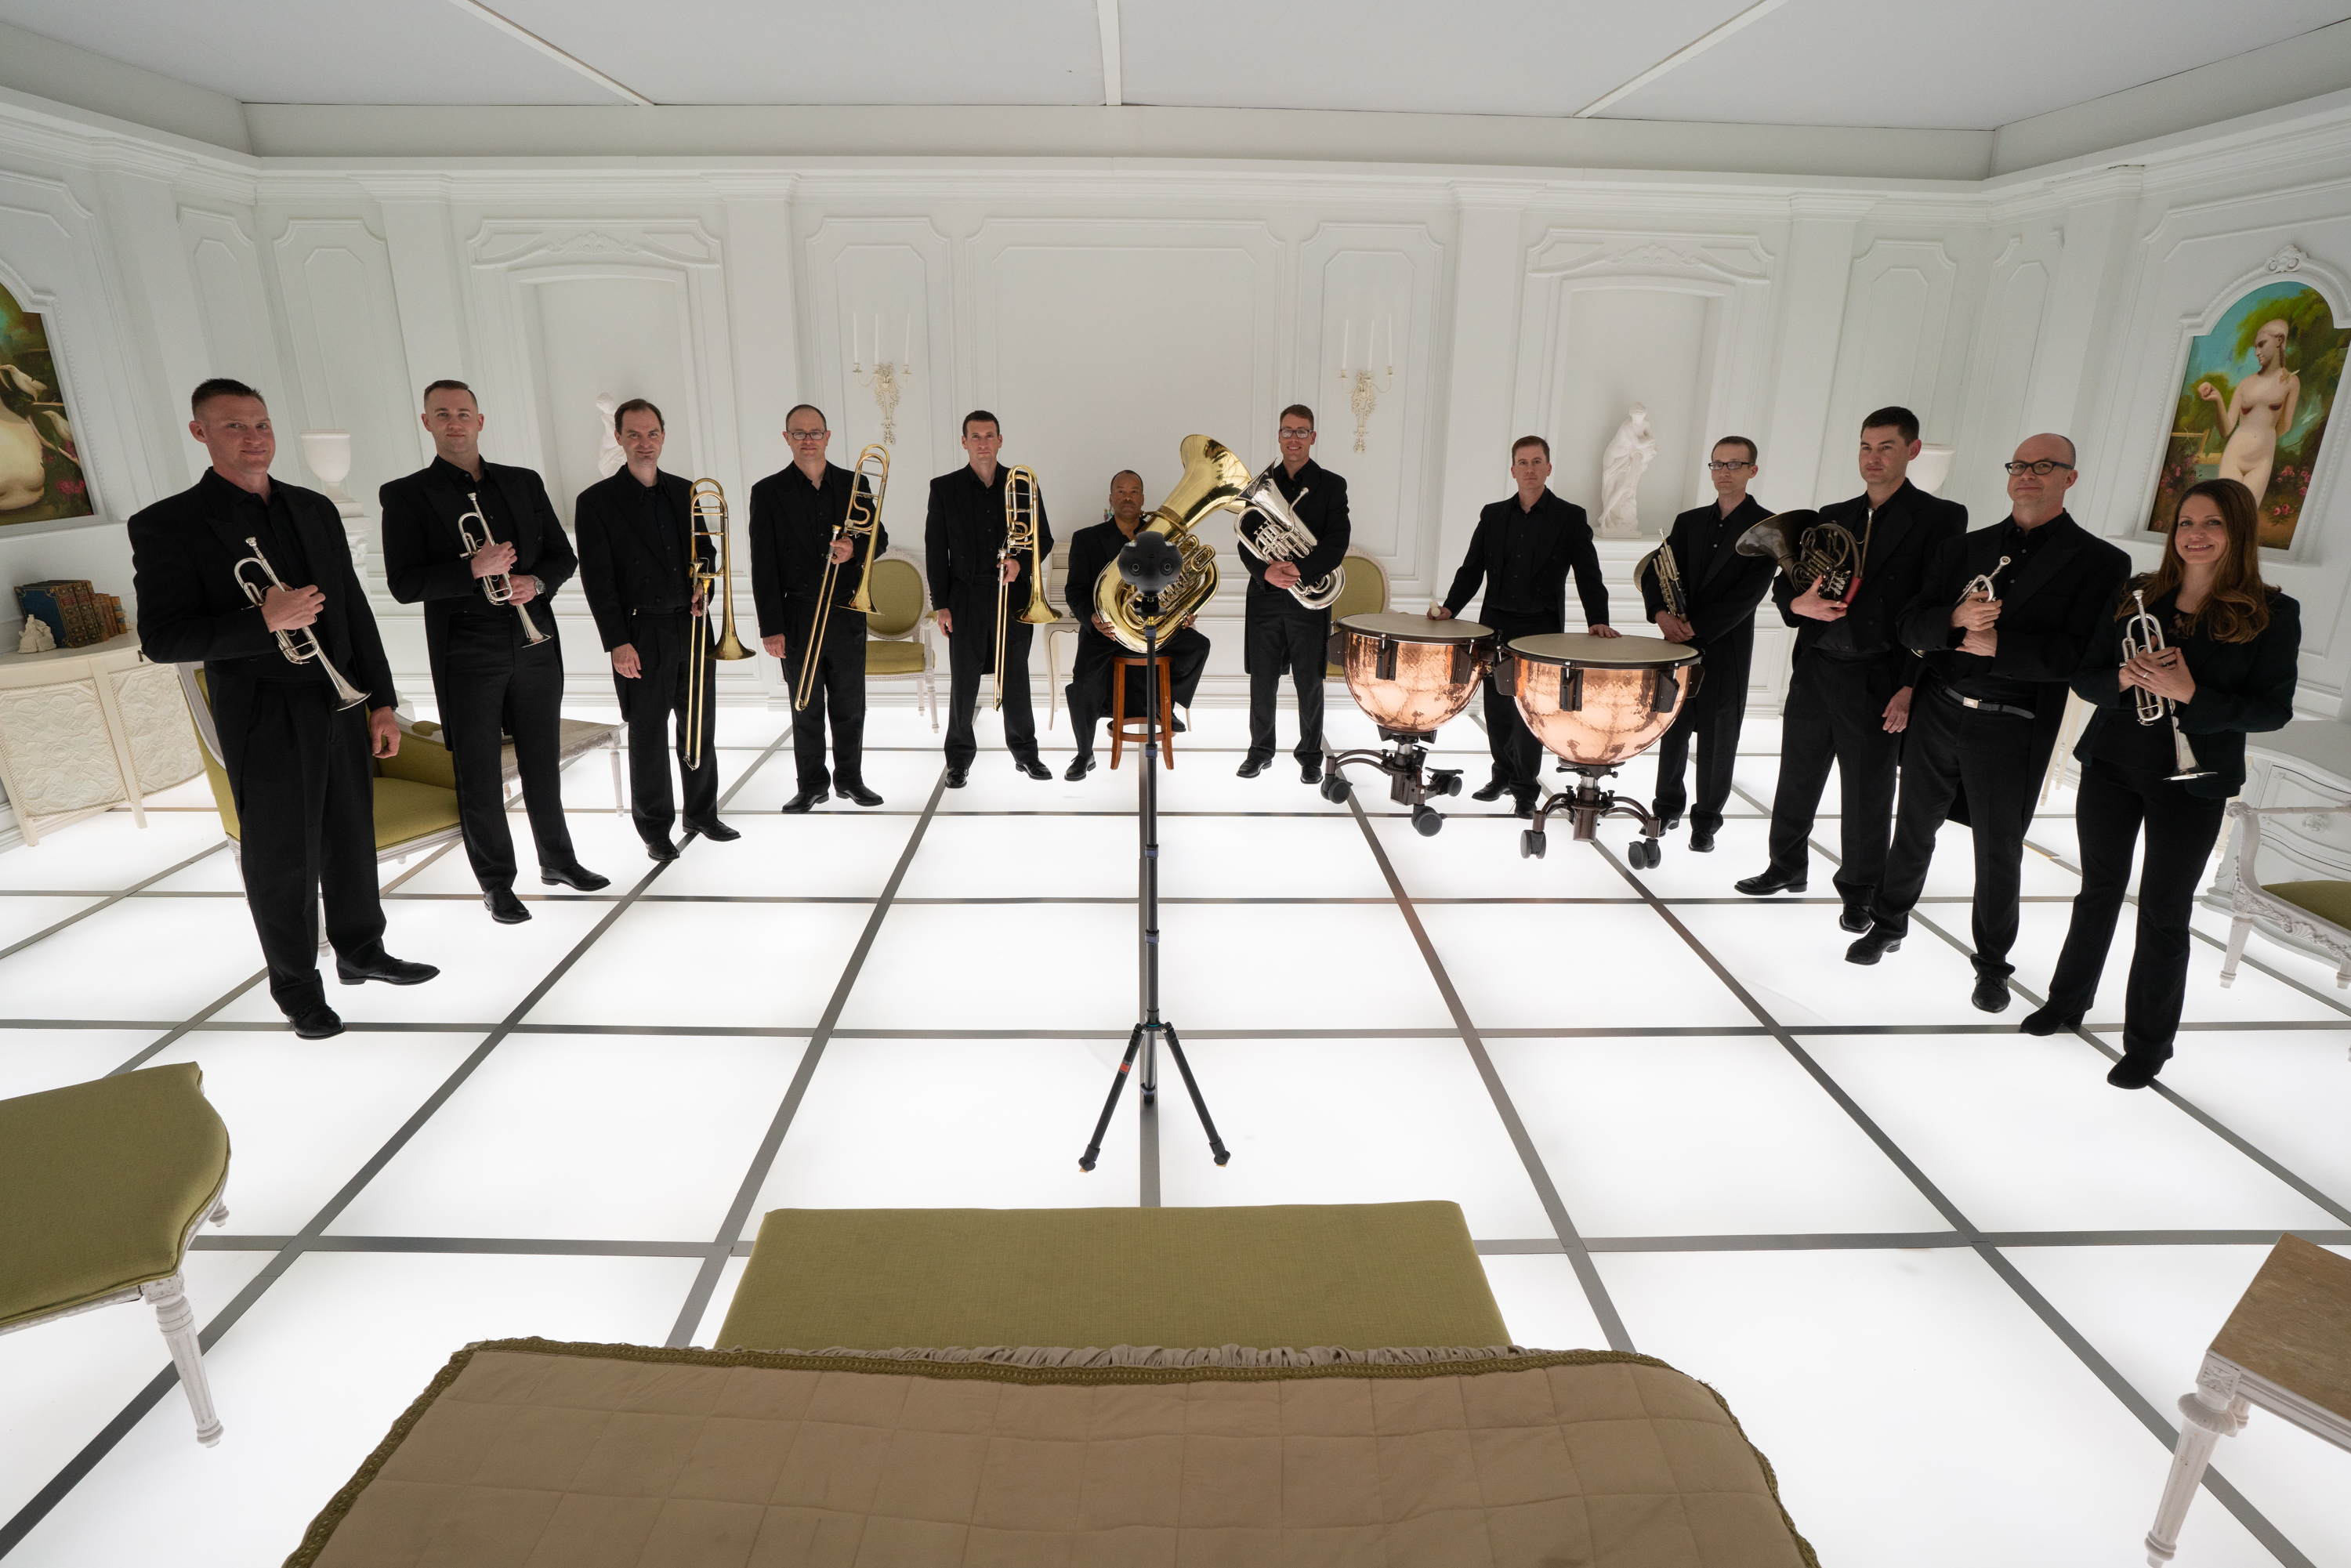 The Barclay Brass band inside the 2001: A Space Odyssey Immersive Art Exhibit "The Barmecide Feast by Simon Birch” at the National Air and Space Museum in Washington, D.C. on April 24, 2018. (Steve Johnson for TIME)